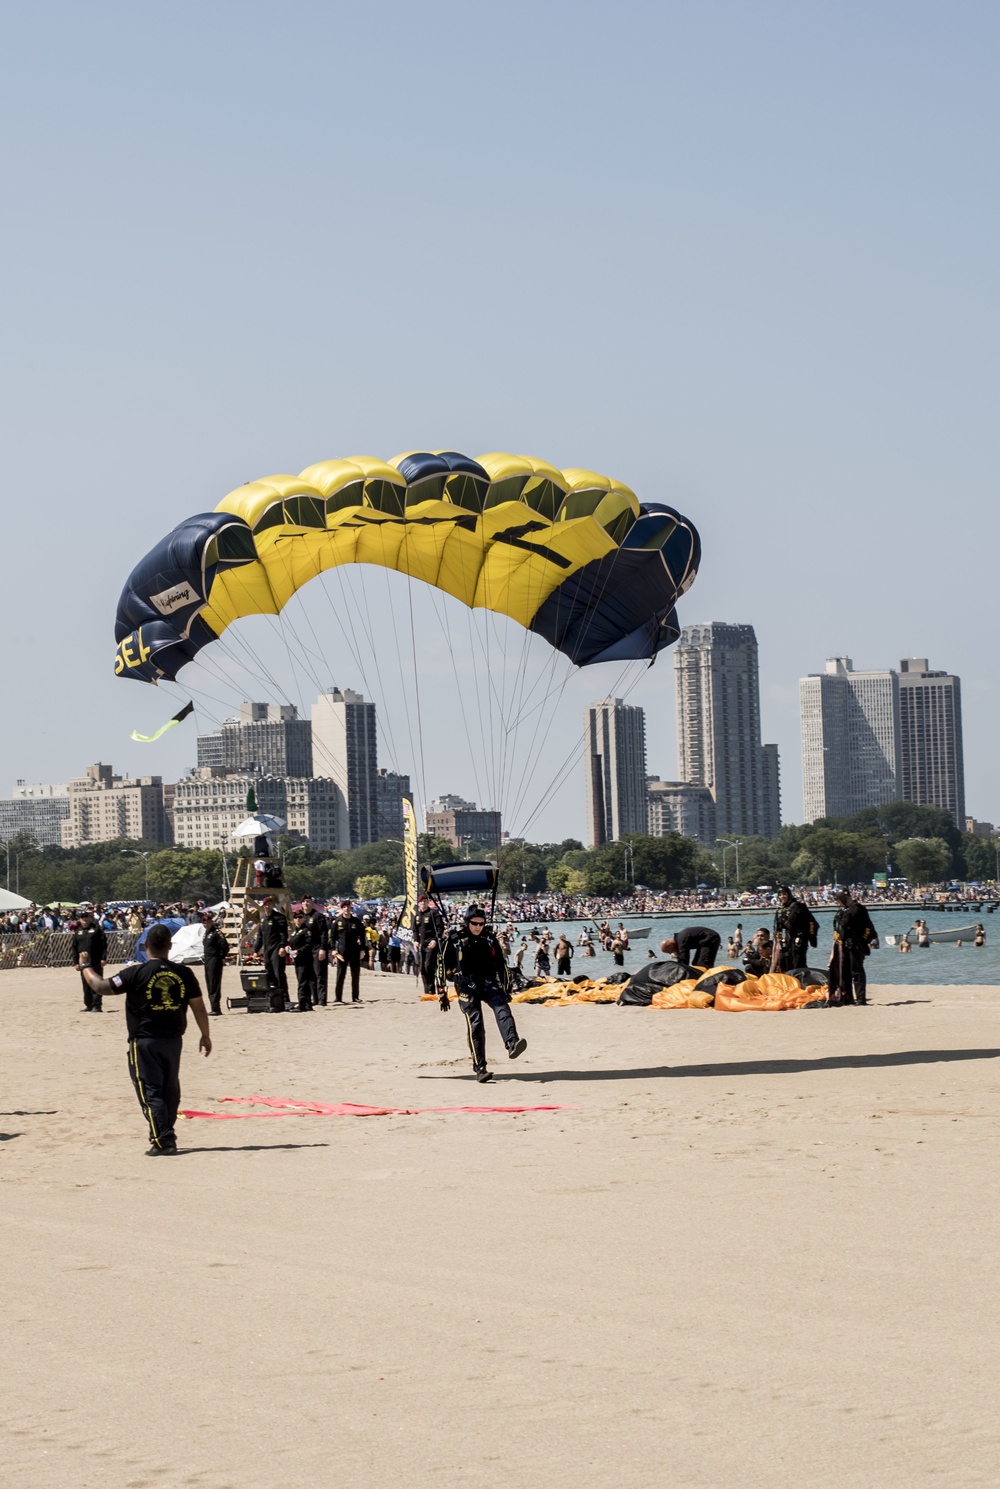 Leap Frogs Perform at the 59th Annual Chicago Air and Water Show